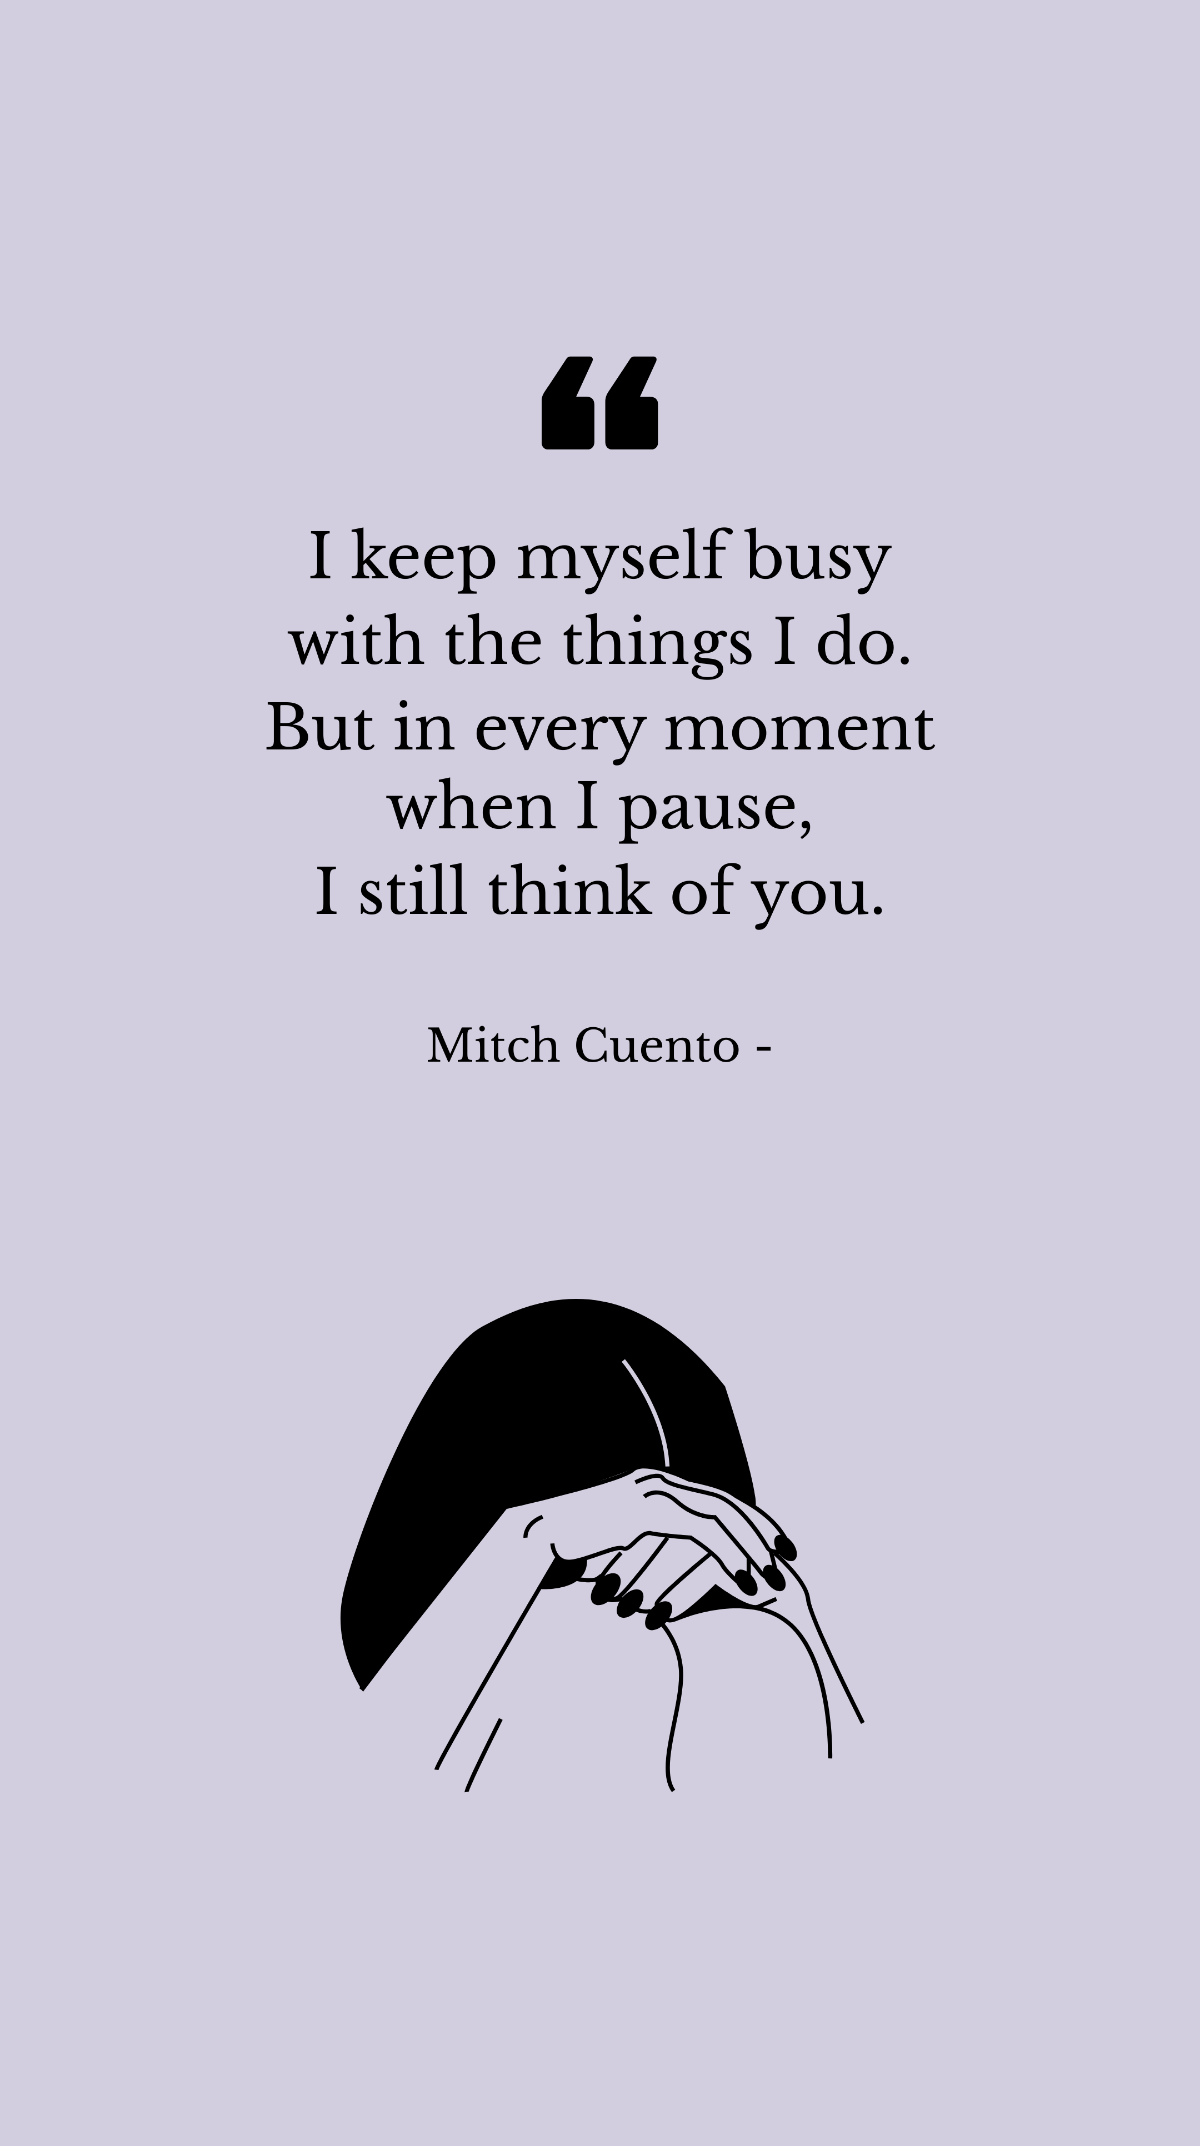 Mitch Cuento - I keep myself busy with the things I do. But in every moment when I pause, I still think of you. Template